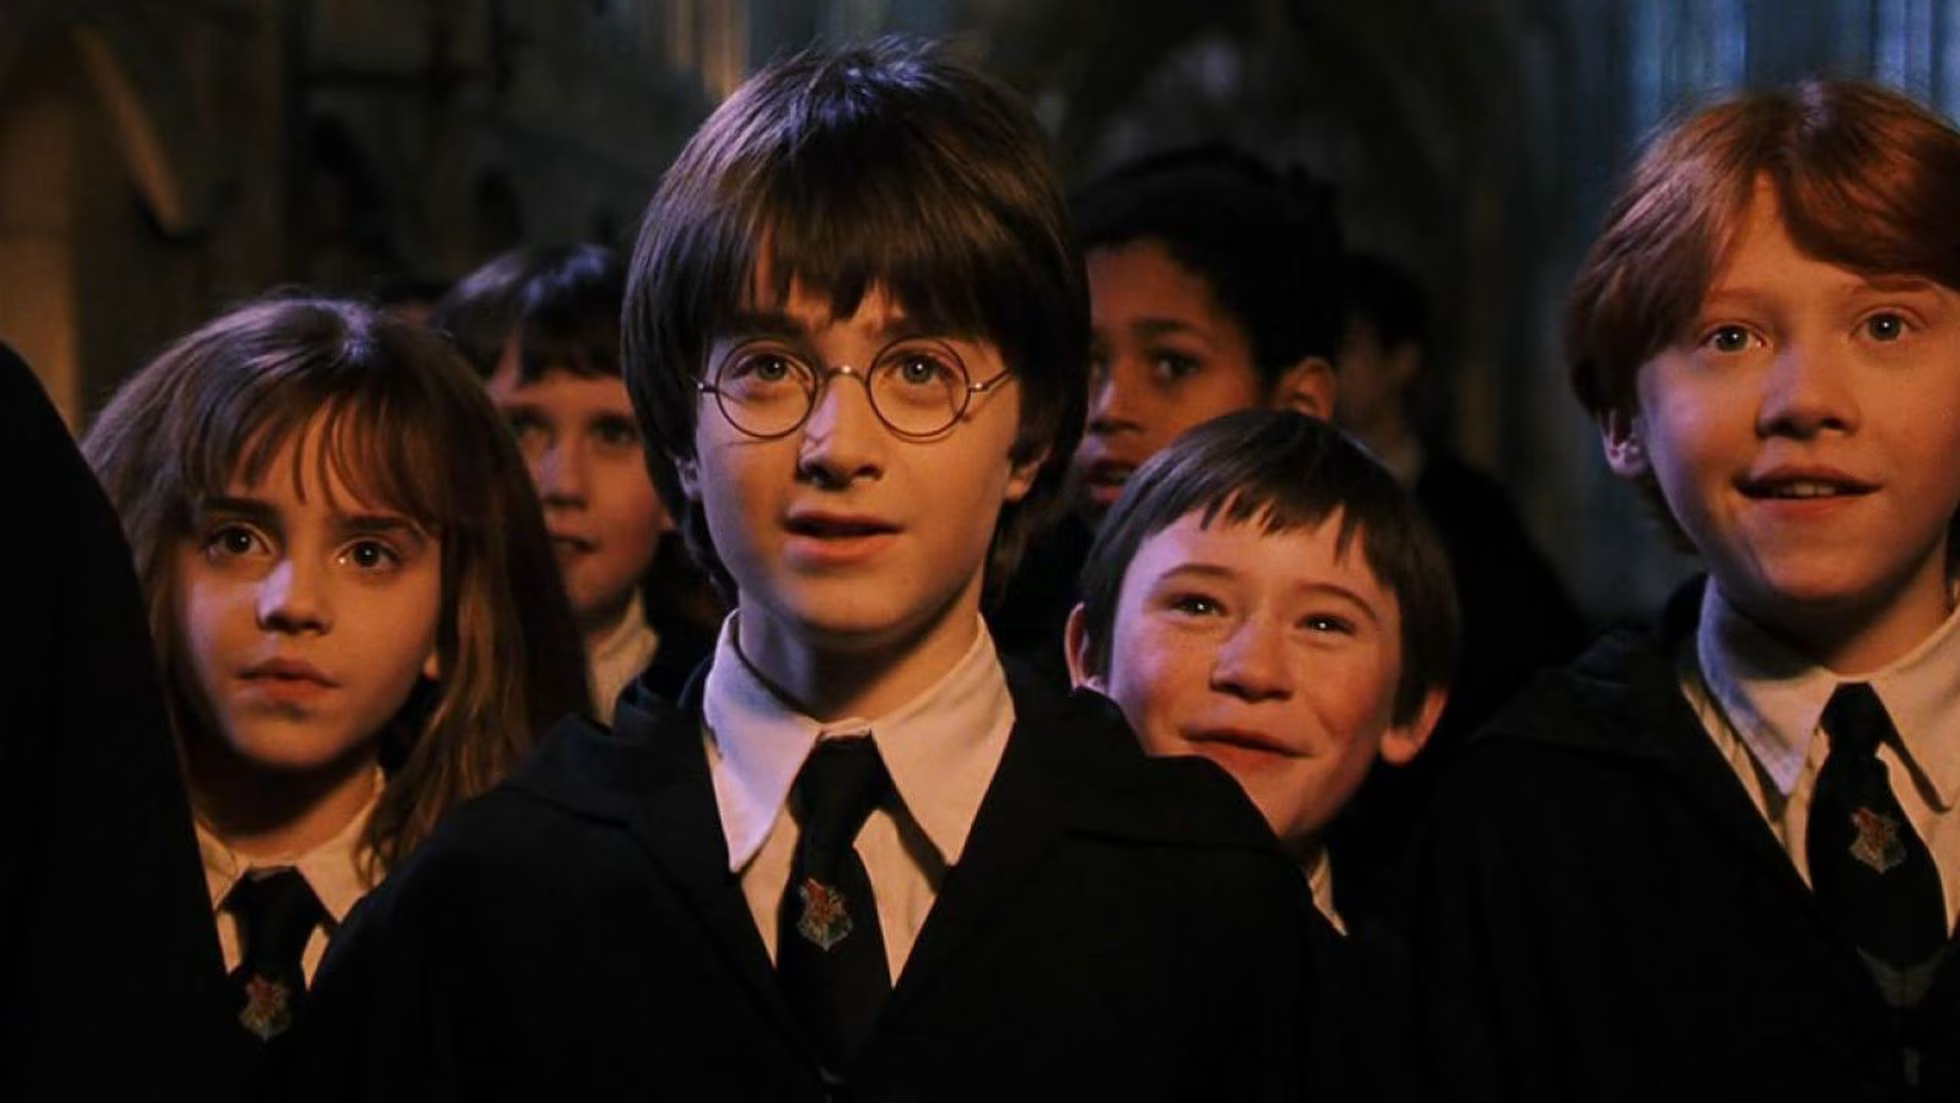 HBO has officially announced a new Harry Potter series based on the books -  Meristation